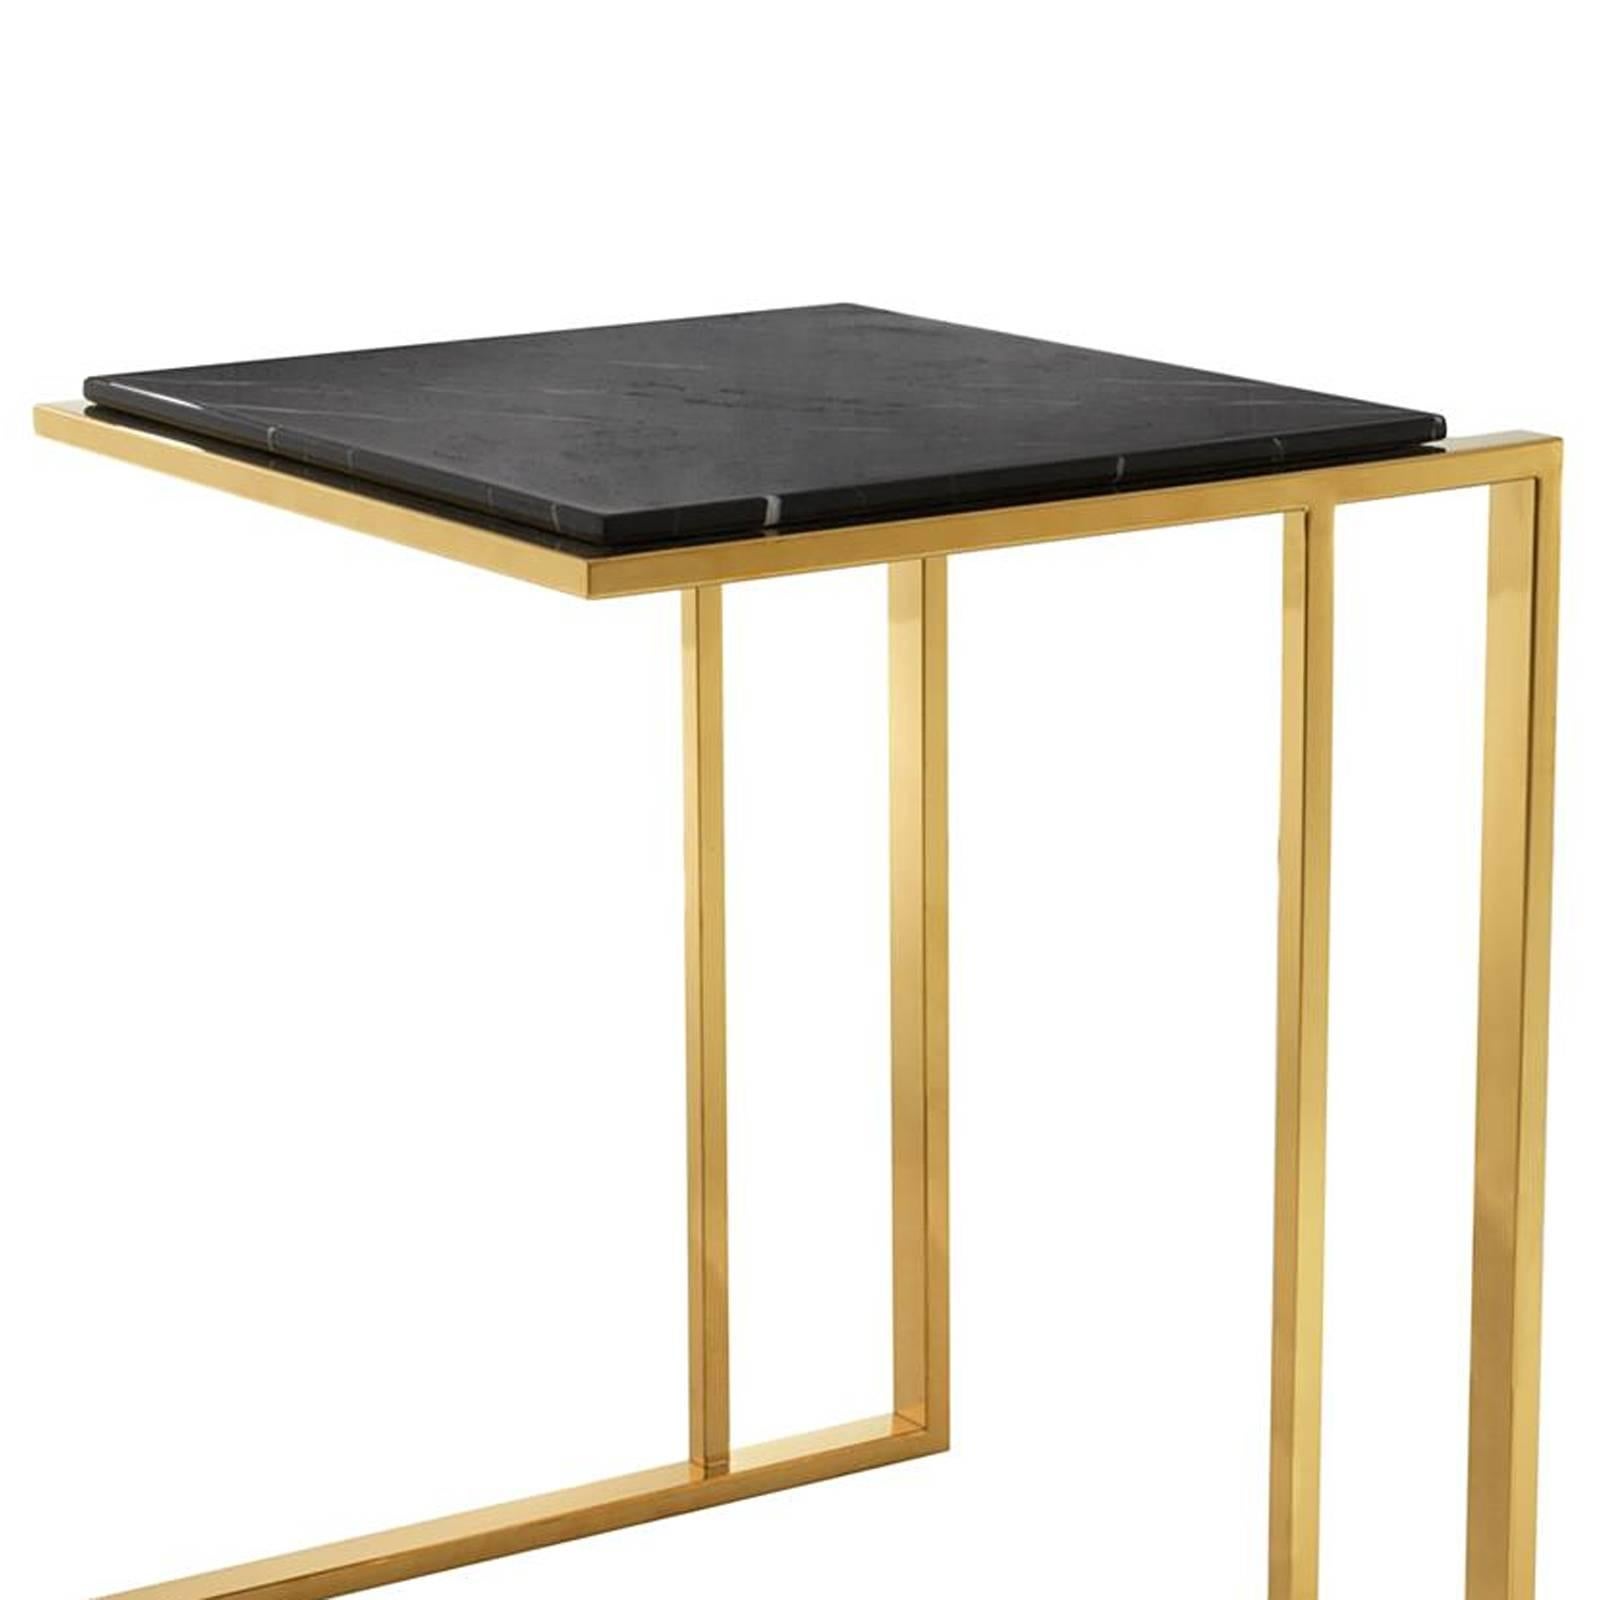 Side table Apetizer with structure in gold
finish. Top in black marble.
Also available with structure in polished stainless
steel or bronze finish with top in black marble.
